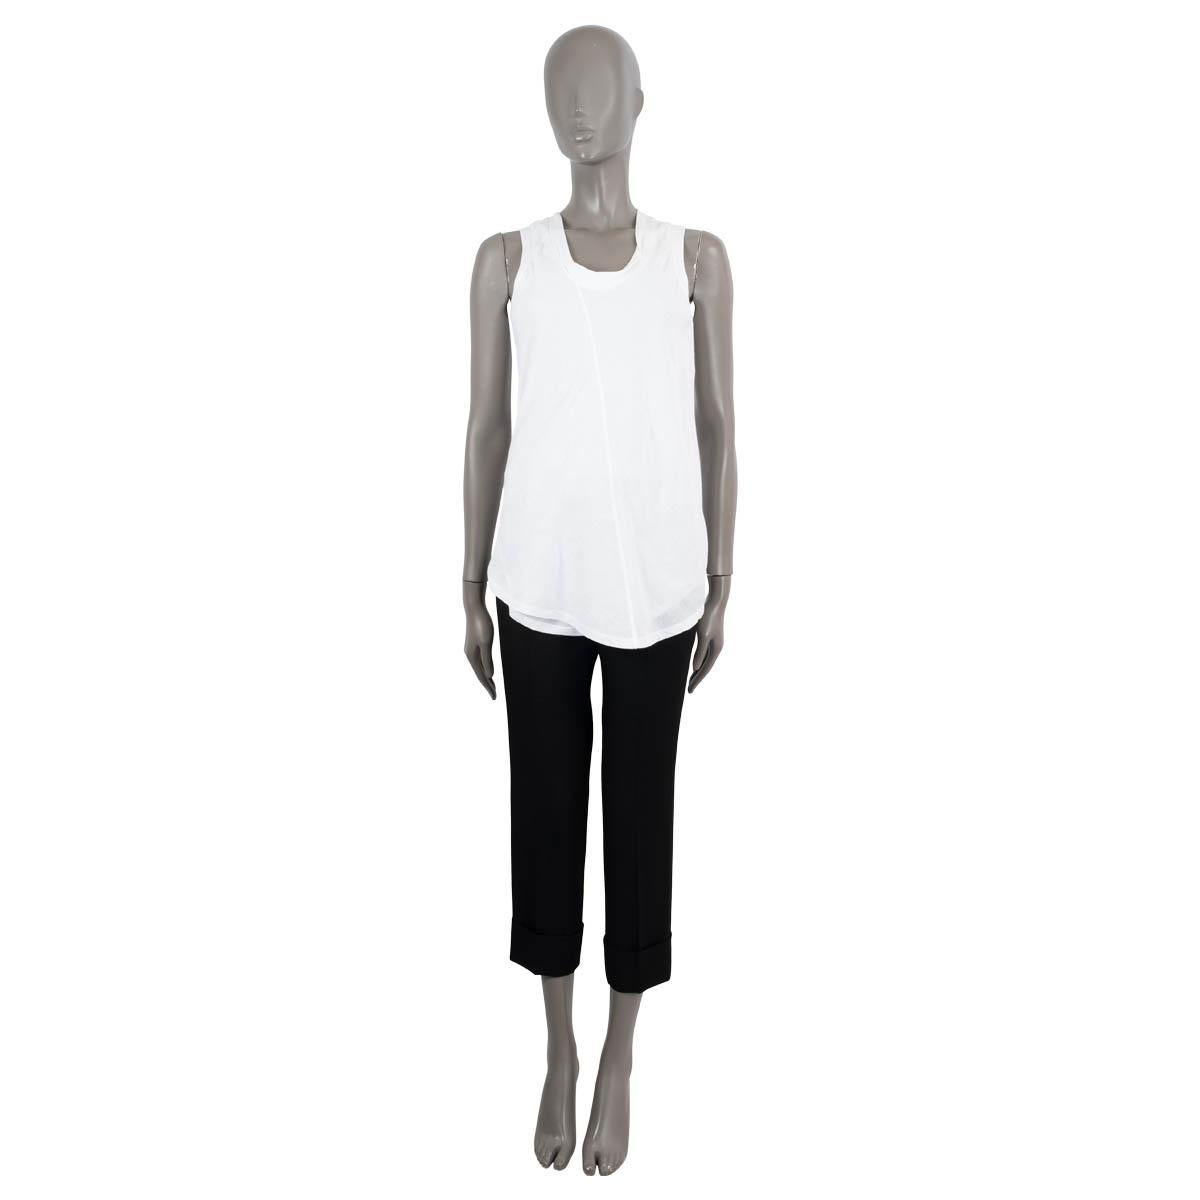 100% authentic Brunello Cucinelli scoop neck tank top with white cotton (71%) and linen (29%) front and cotton (94%) and lycra (6%) jersey trims and back. Lined in white cotton (100%). Has been worn and is in excellent condition.

Measurements
Tag